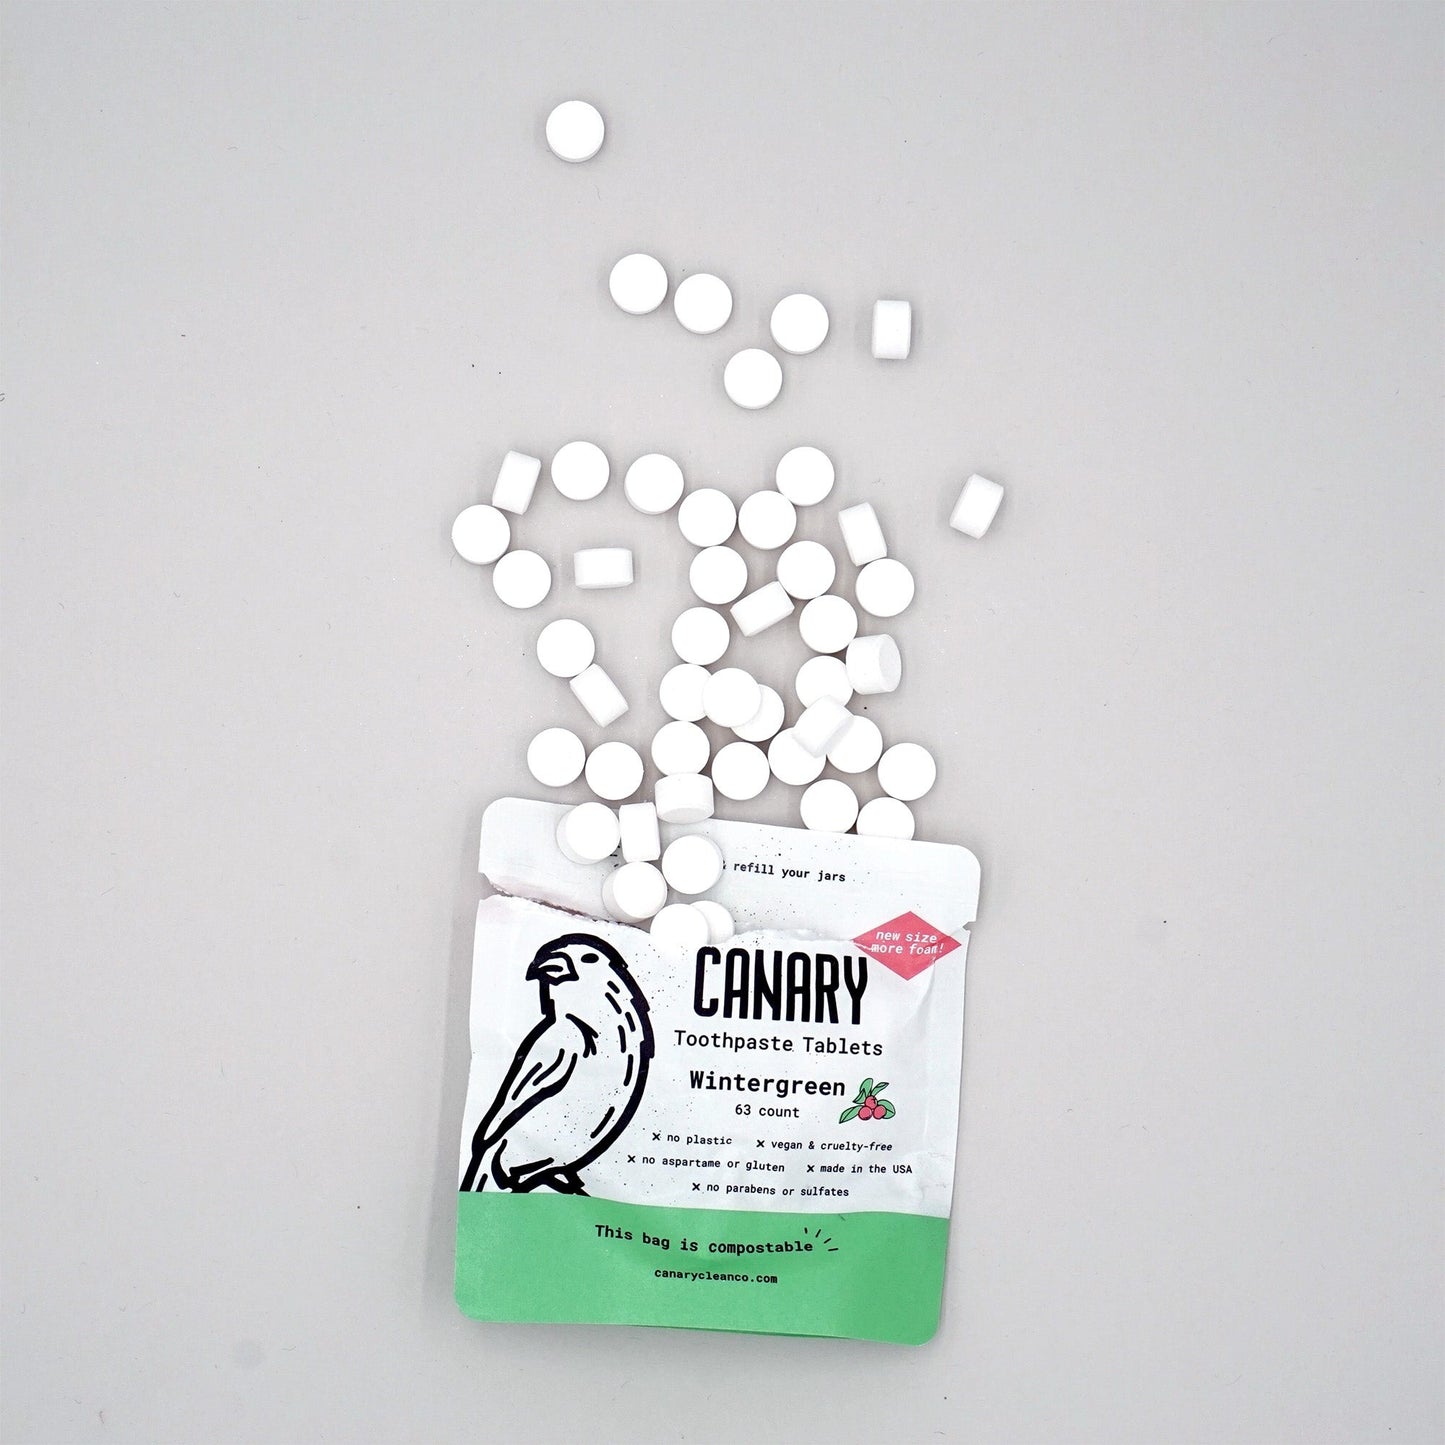 Canary Wintergreen Toothpaste Tablets, sample size 63 count compostable pouch, front view of the pouch with tablets spilling out of open pouch